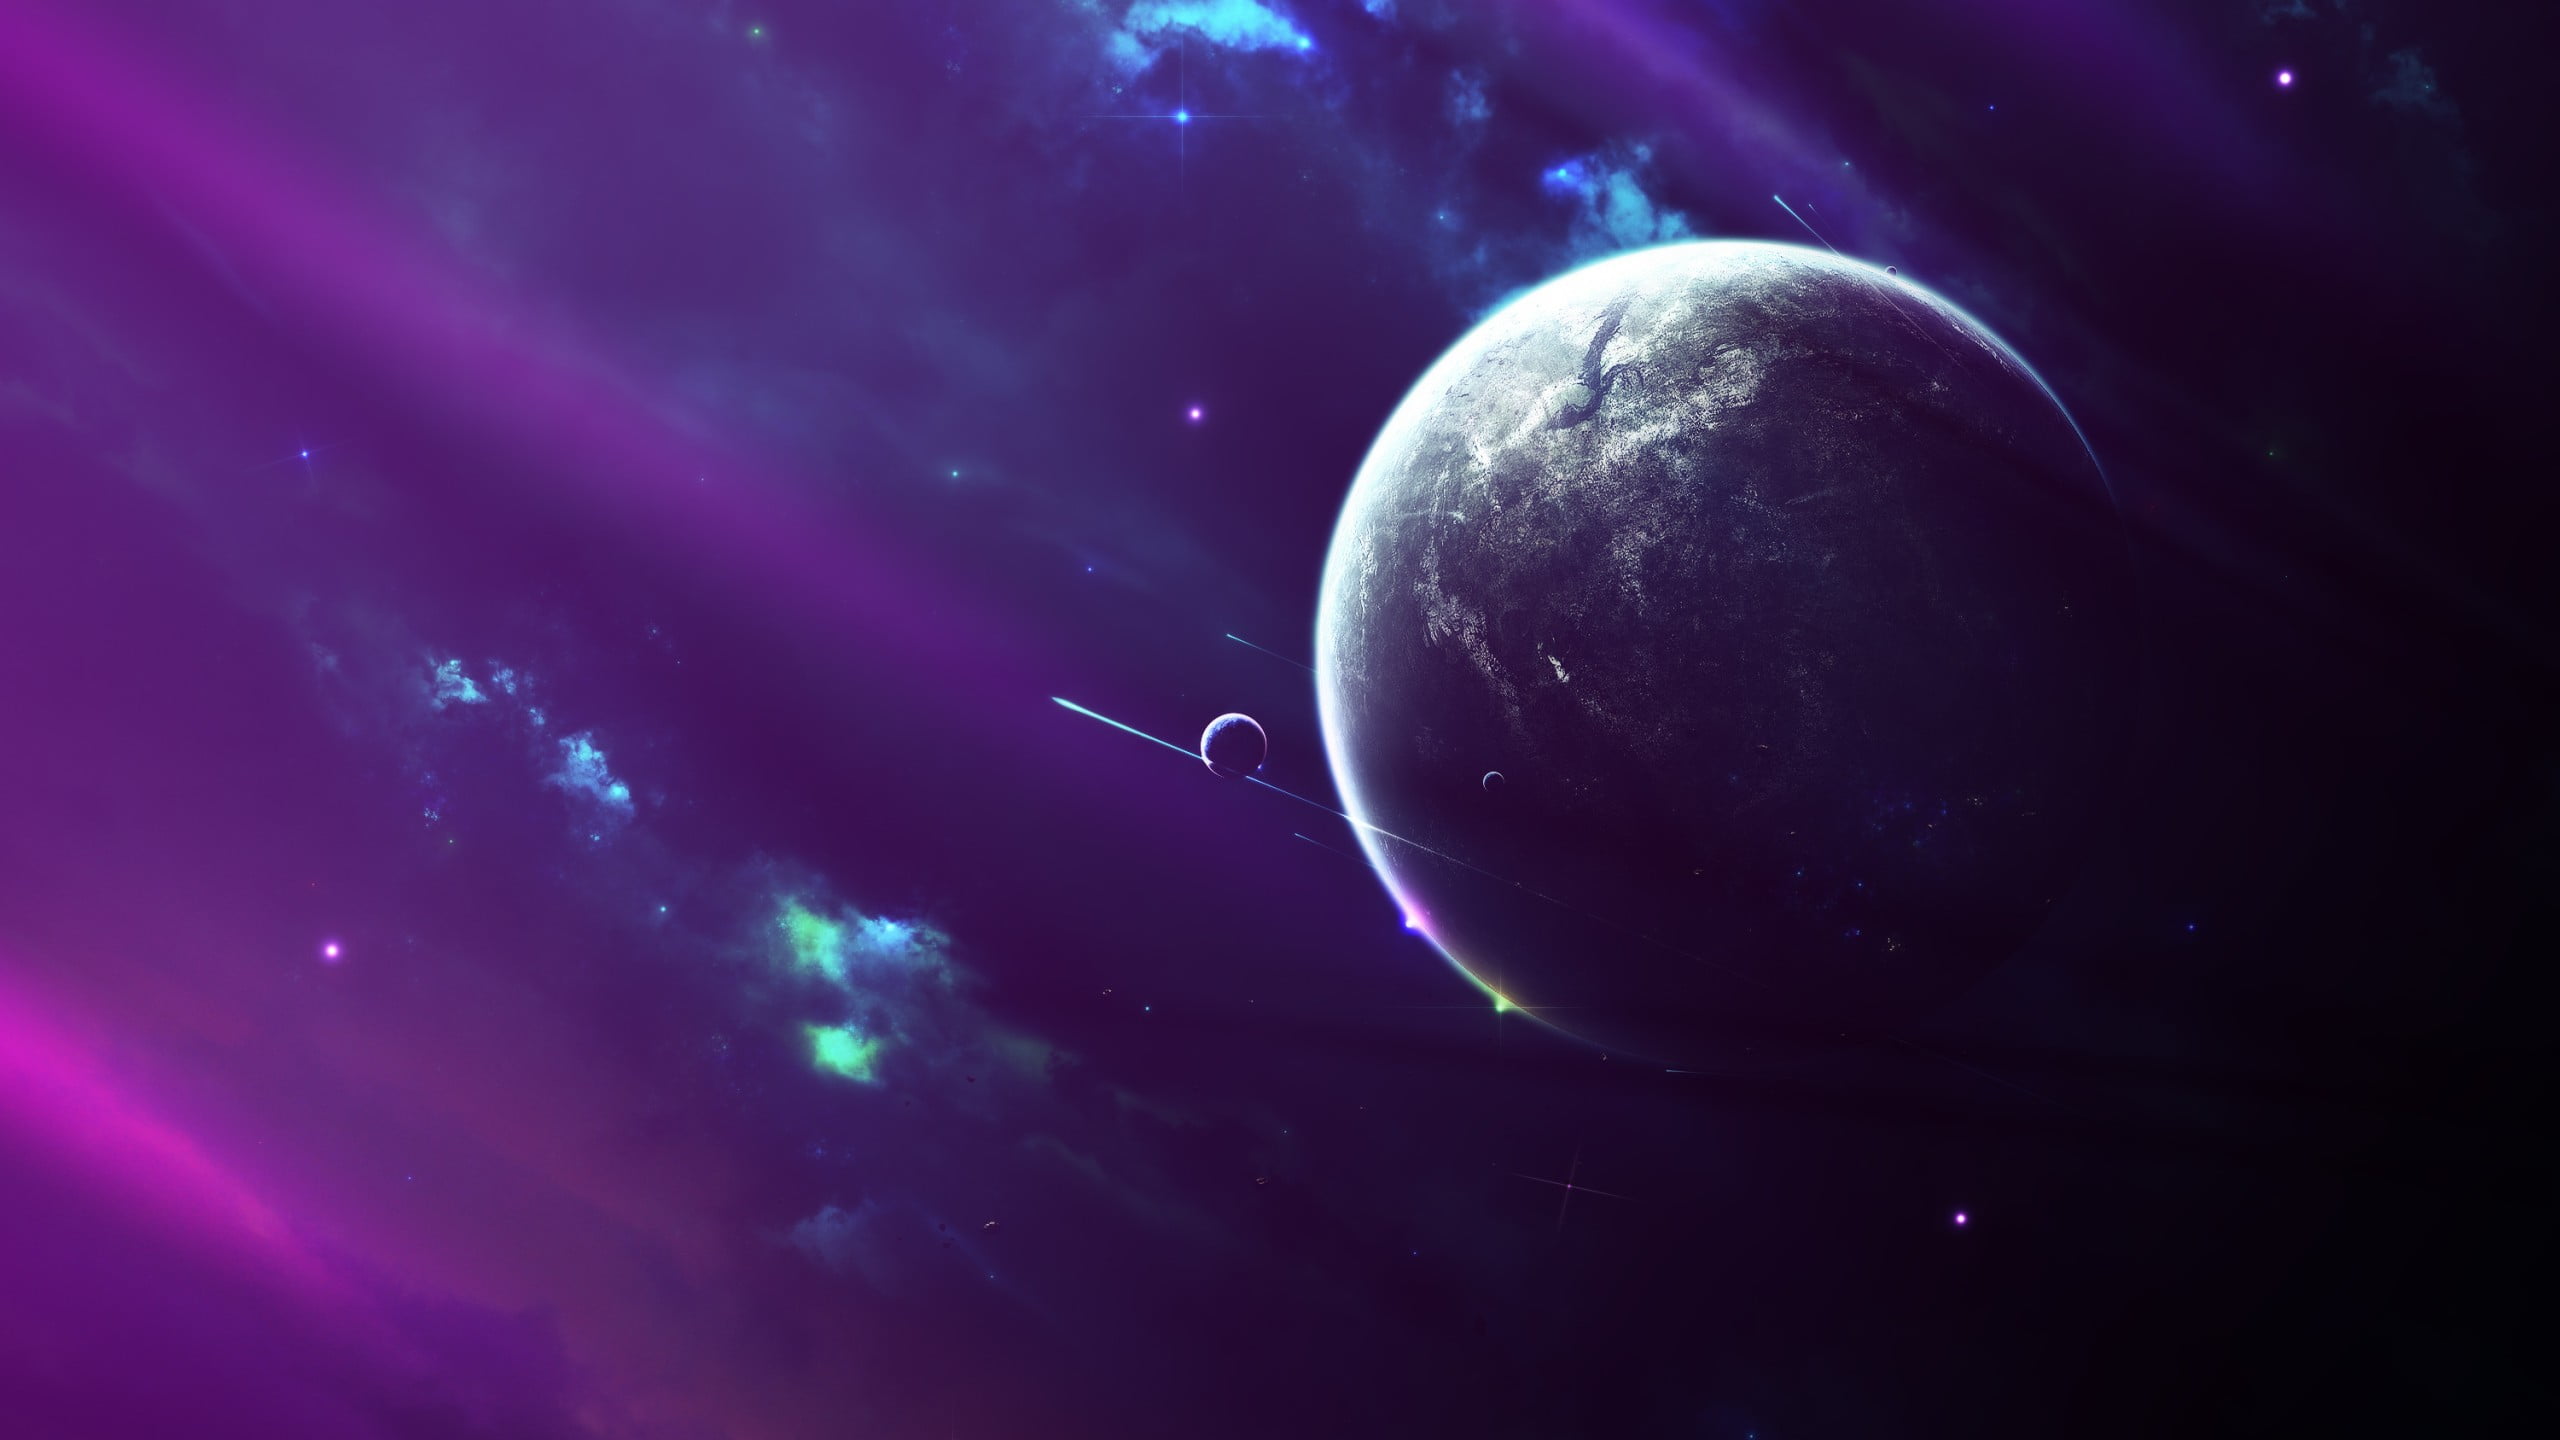 outer space painting, space, Moon, nebula, planet